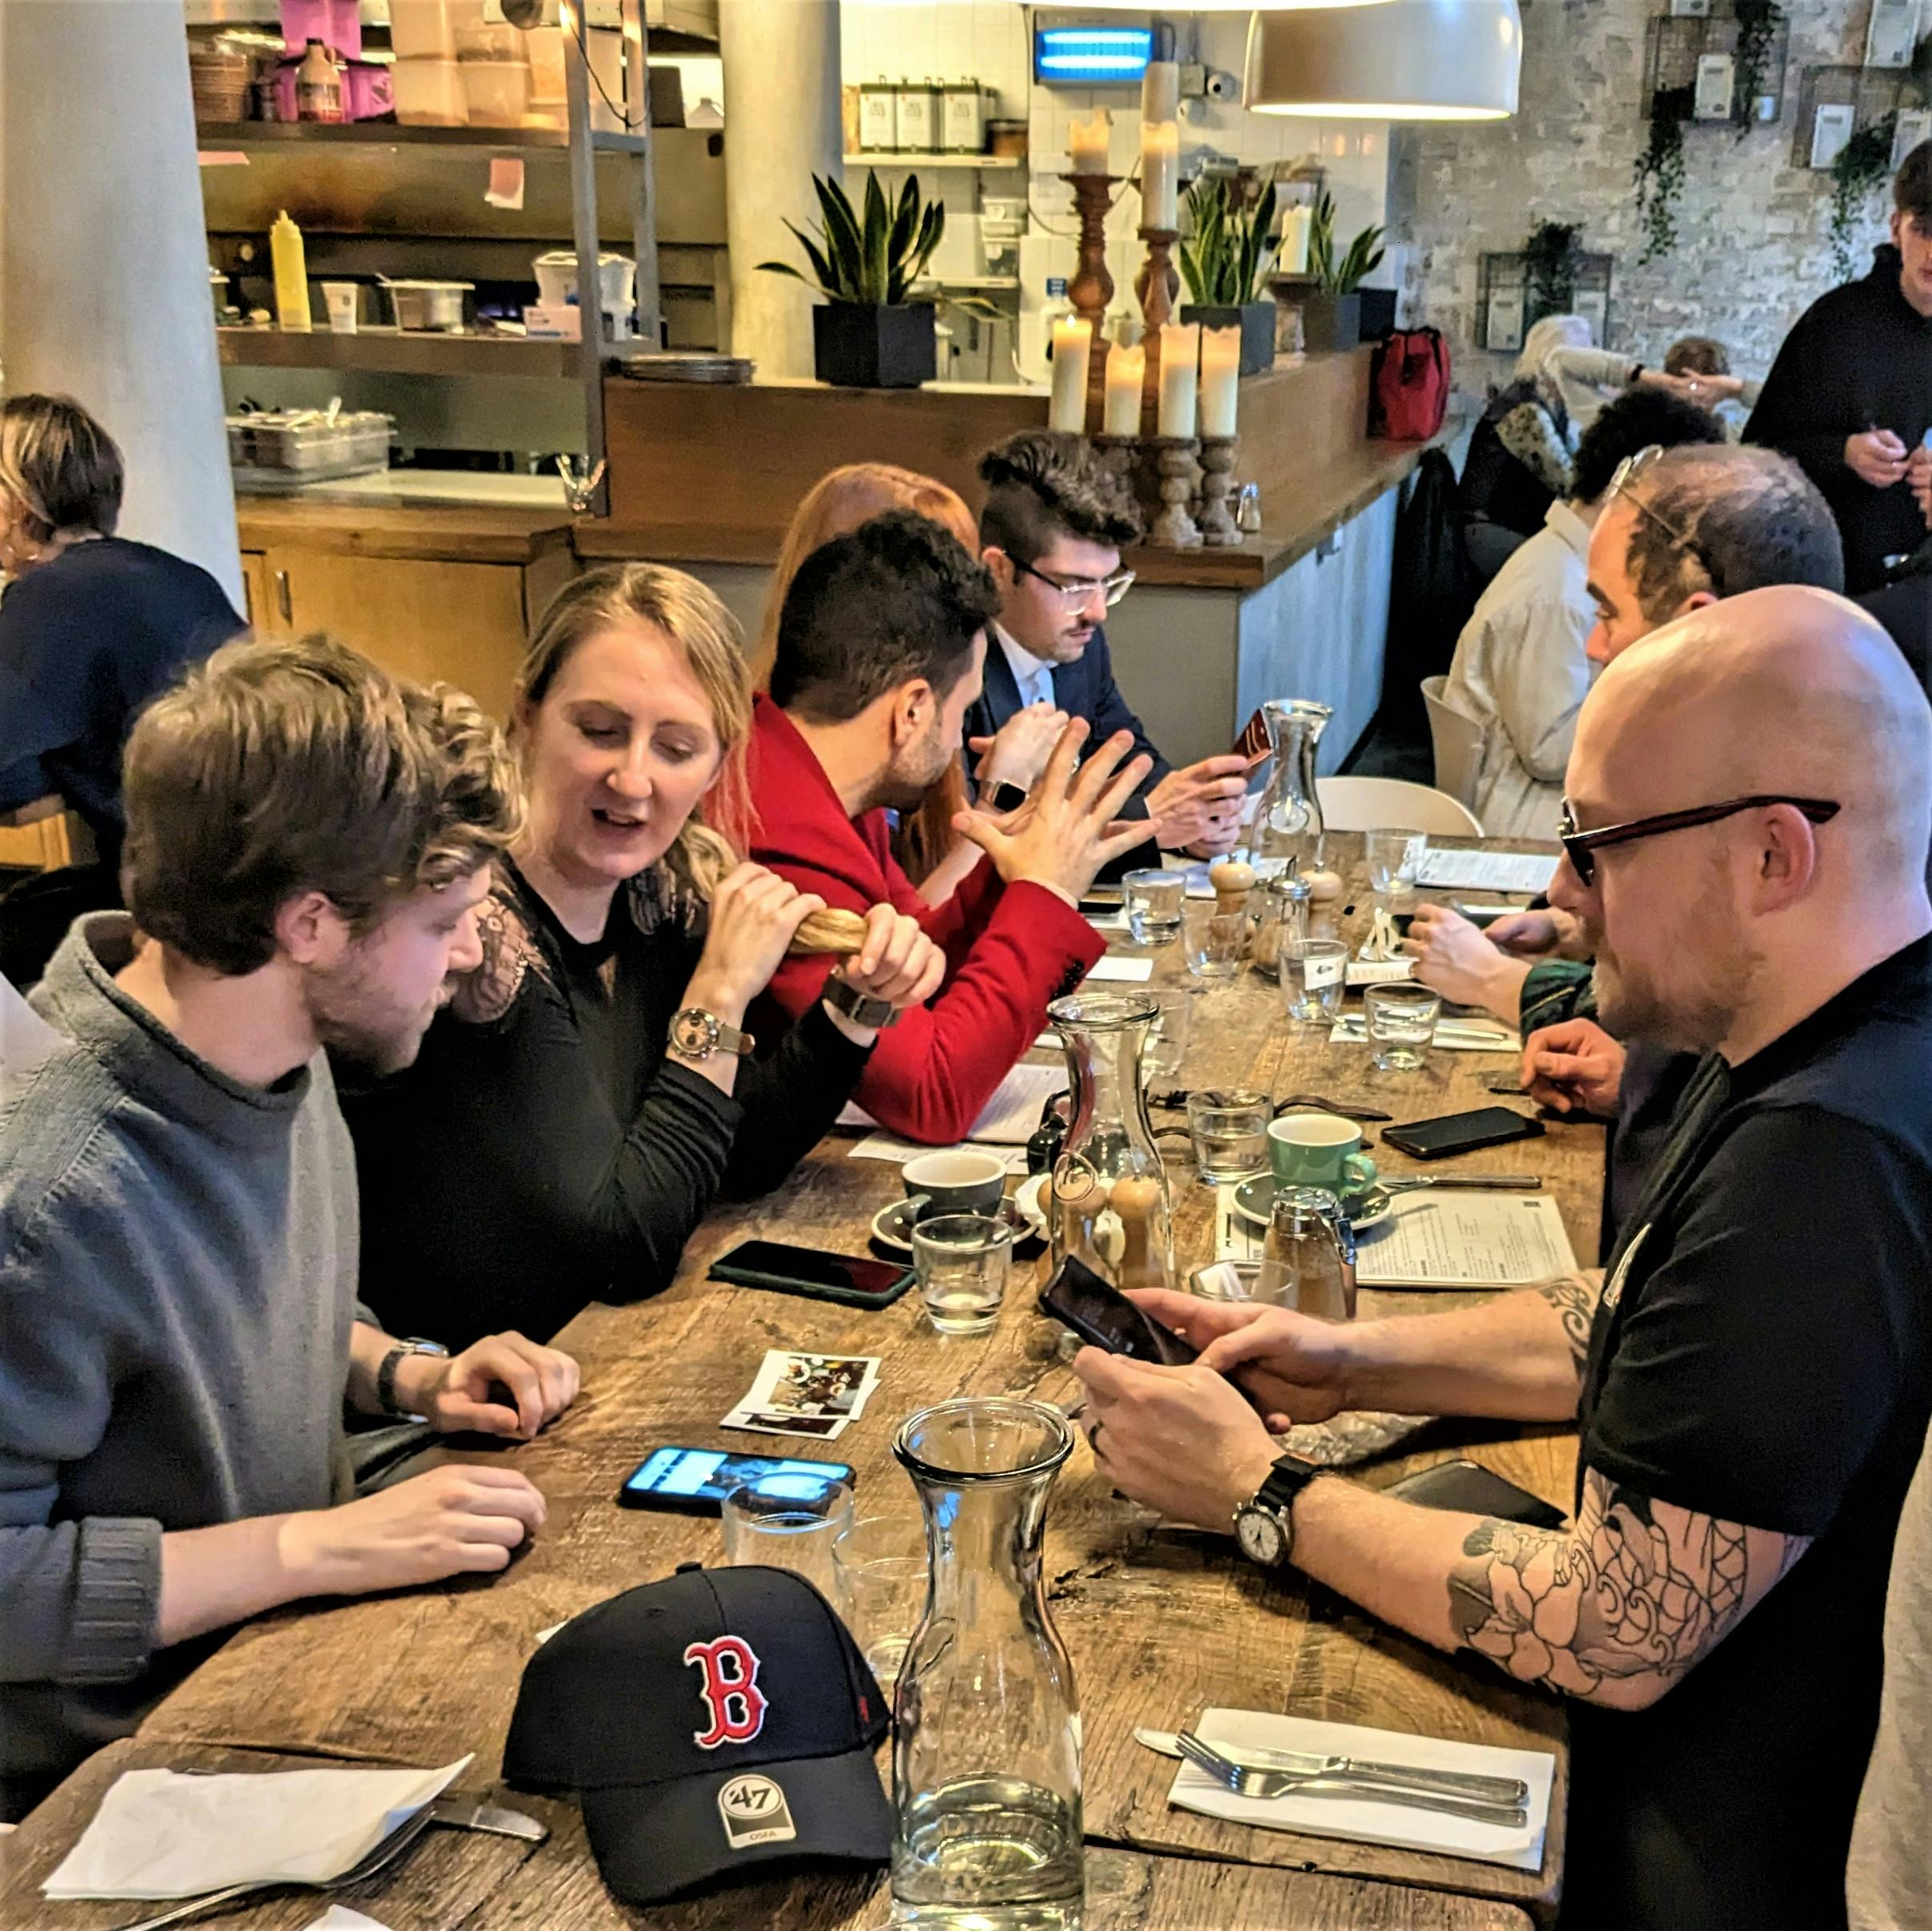 Watch collectors at a meetup over brunch sitting round a table talking and looking at watches